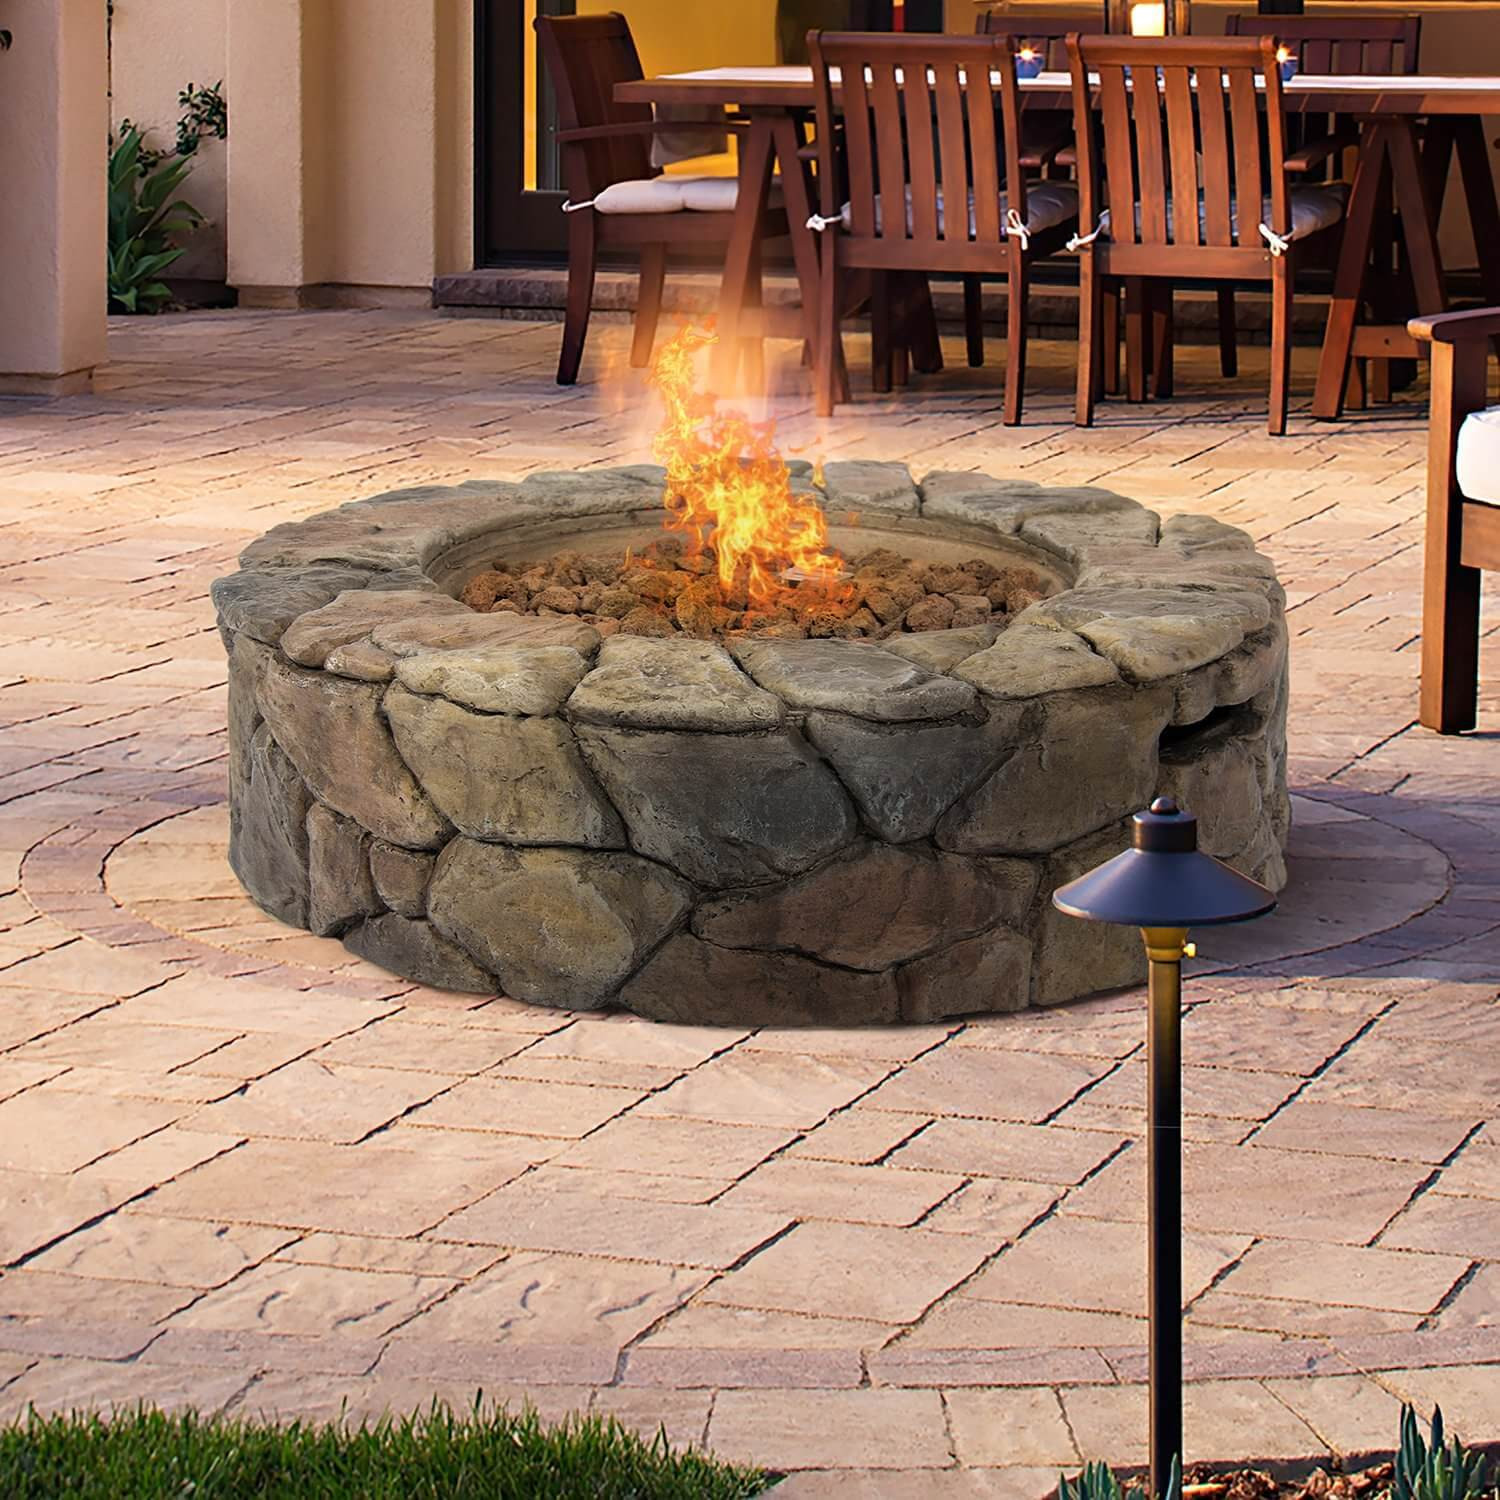 Patio Fire Pit Propane
 Top 15 Types of Propane Patio Fire Pits with Table Buying